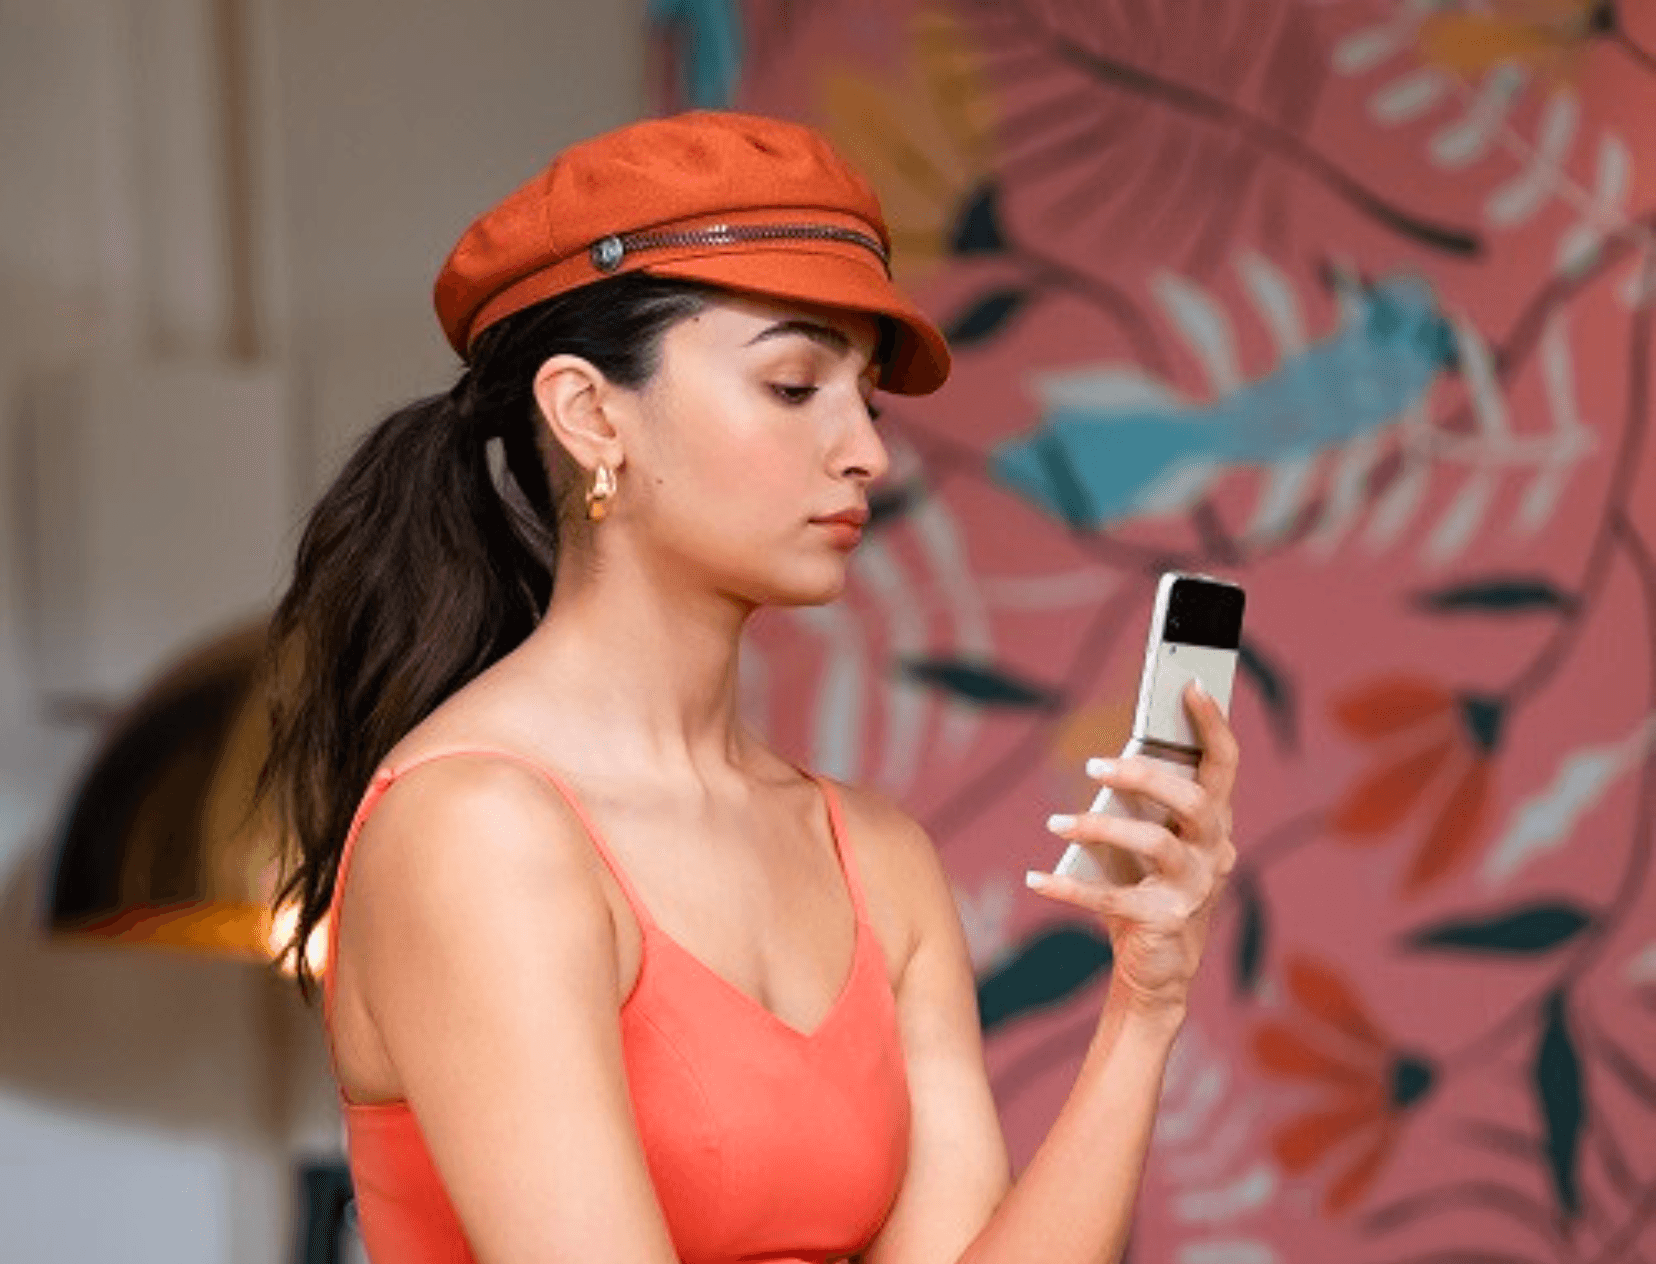 Bored Of Swiping Right? This Viral App Is The New Hangout For Singles